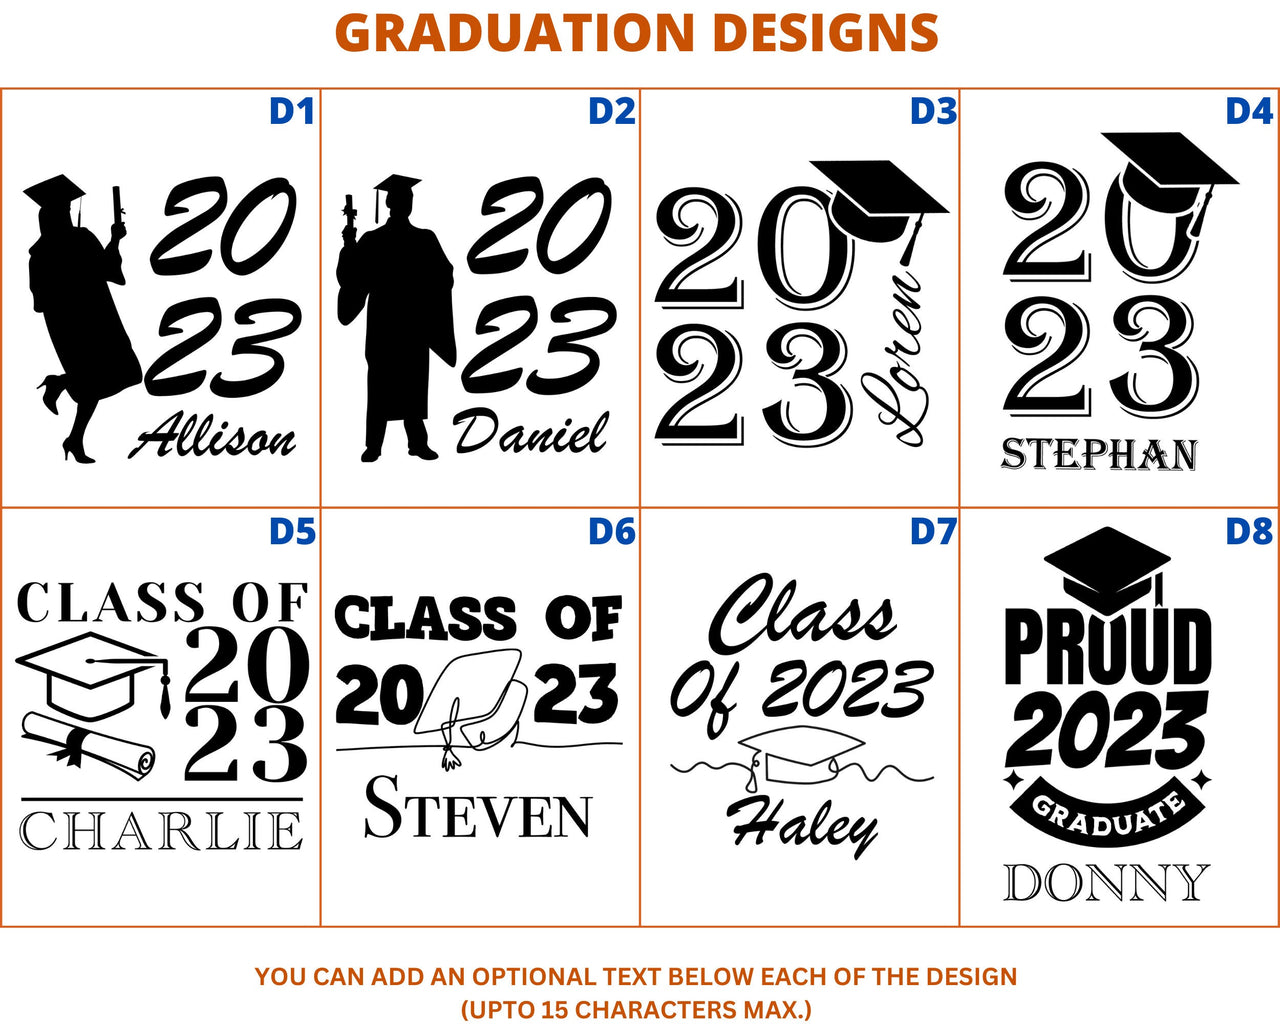 Personalized Tumbler 30 oz Graduation Gift Class 2023, College Graduate Gifts for Her, Graduation Tumbler, Personalized Grad Gift for Friend